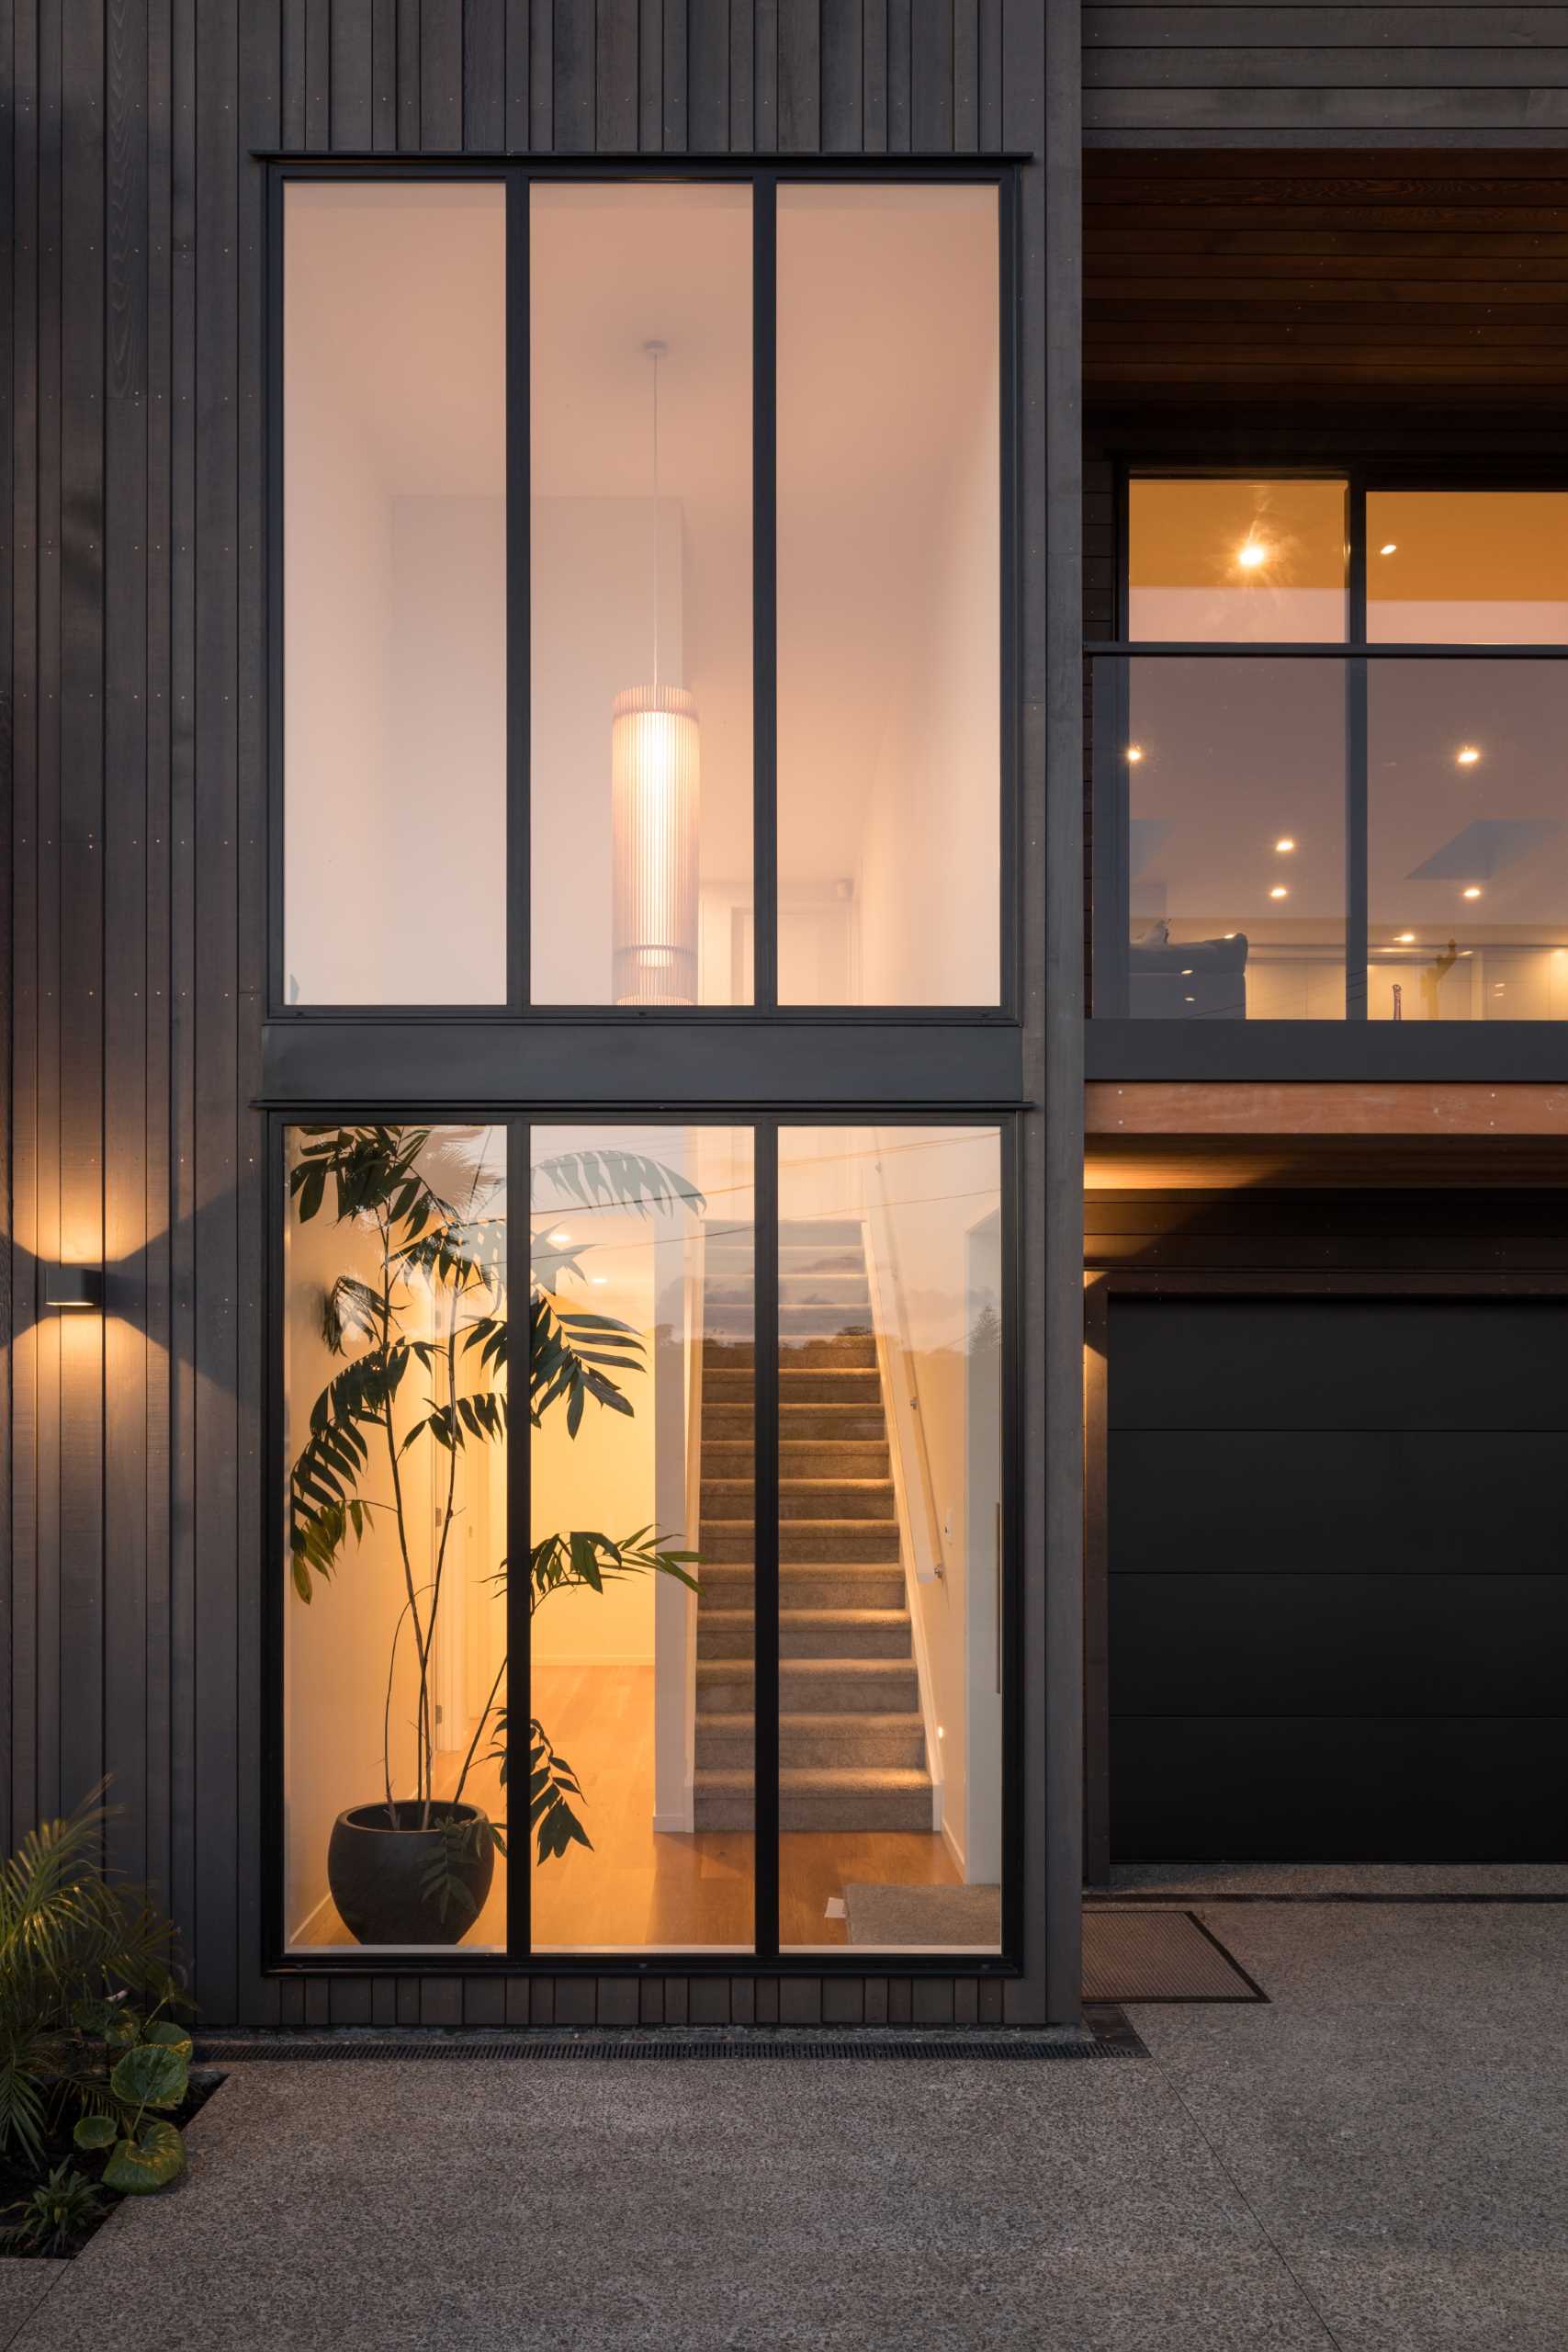 Tall windows allow the natural light to shine through to the interior of this renovated home, while in the evening, glimpses of the interior as well as the glow from the lights can be seen.